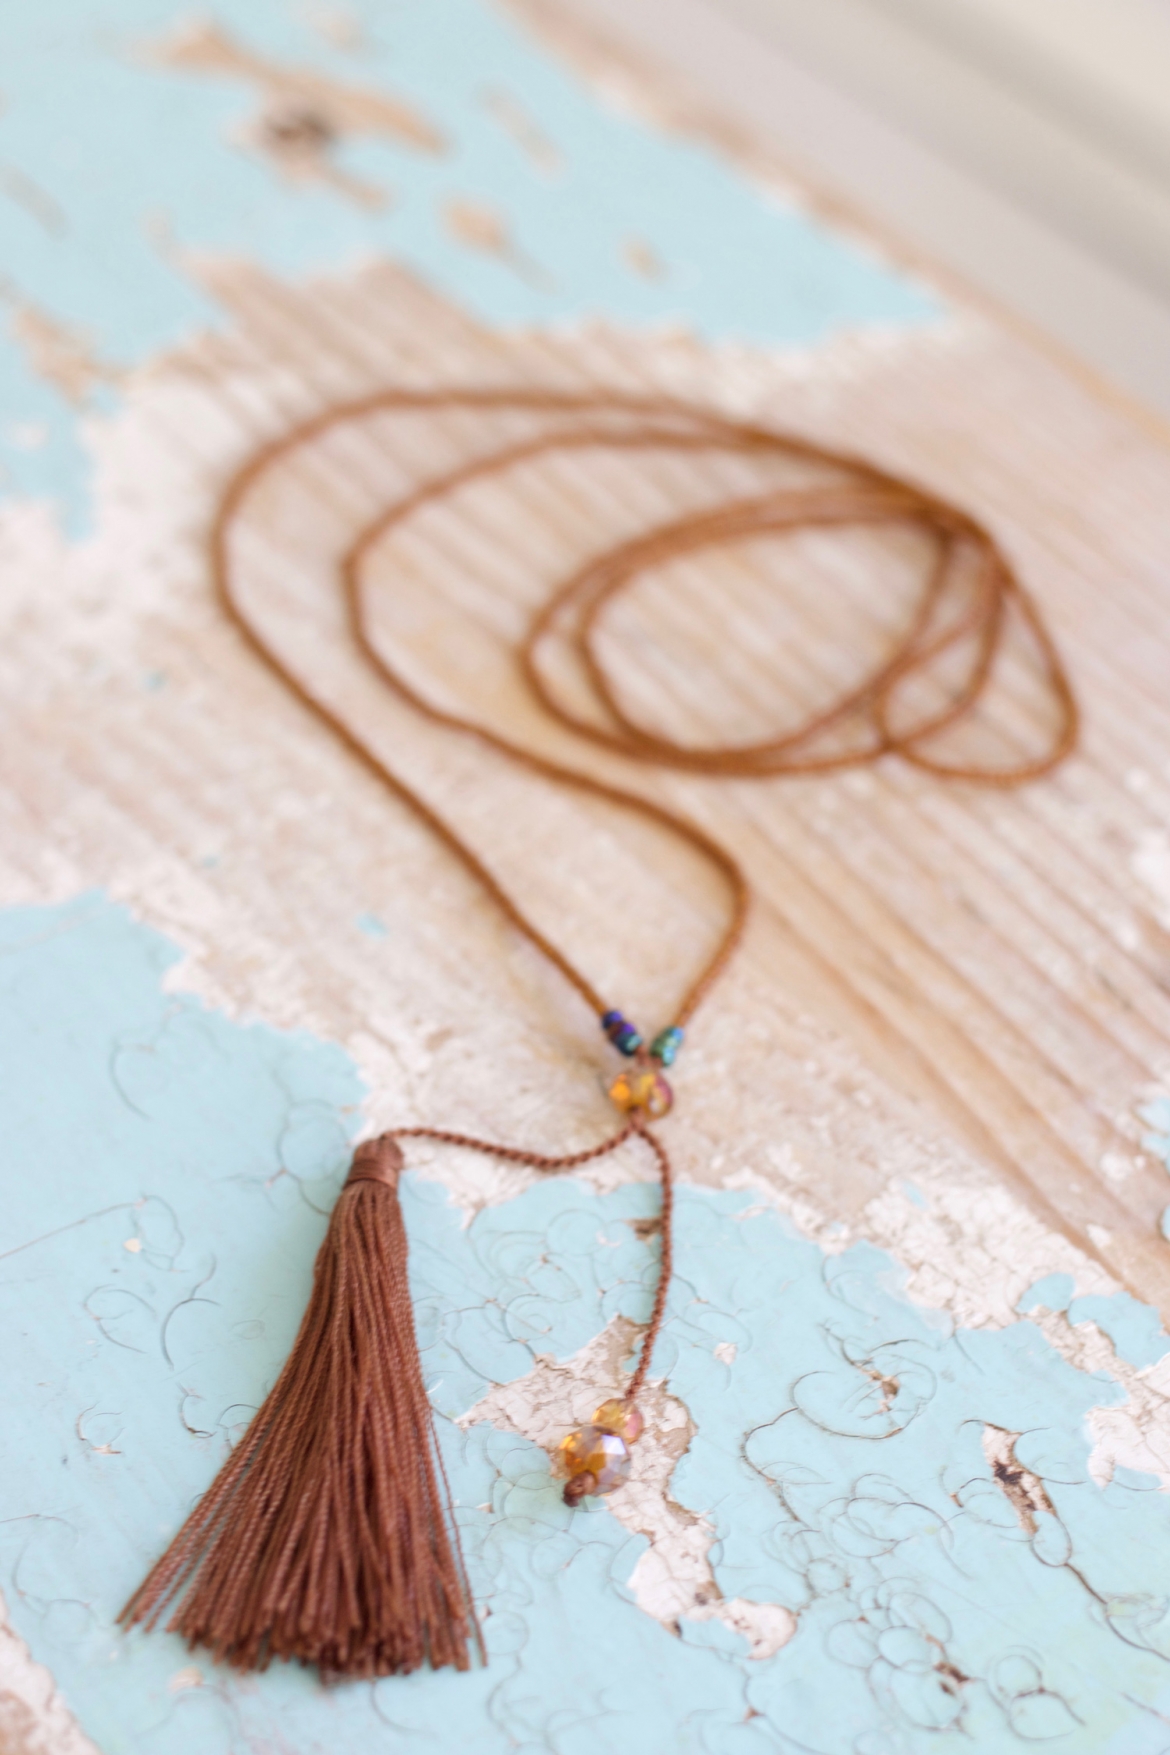 Gorgeous handmade necklace for sale on the blog | DESIGN THE LIFE YOU WANT TO LIVE | @lynneknowlton Each piece of jewelry is beautifully gift wrapped and sent with love!